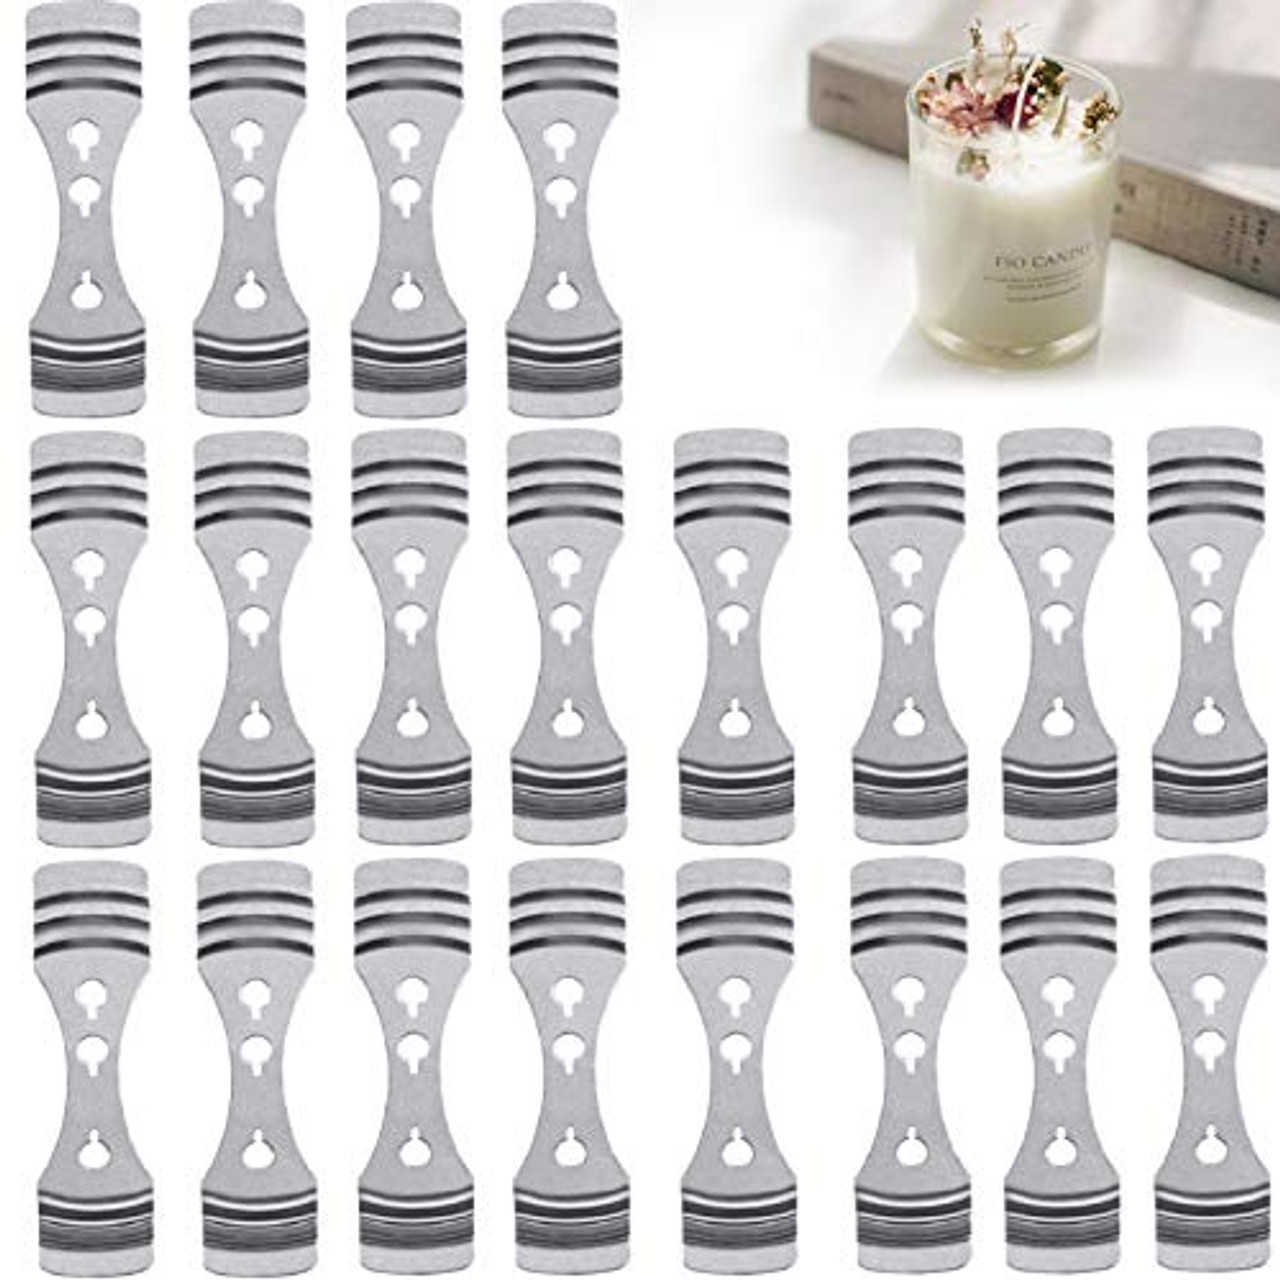 Candle Wicks, Metal Candle Wick Centering Device, Candle Wick Holder, 100 Pieces 8 Candle Wick for Candle Making, Candle Making Wicks, Natural